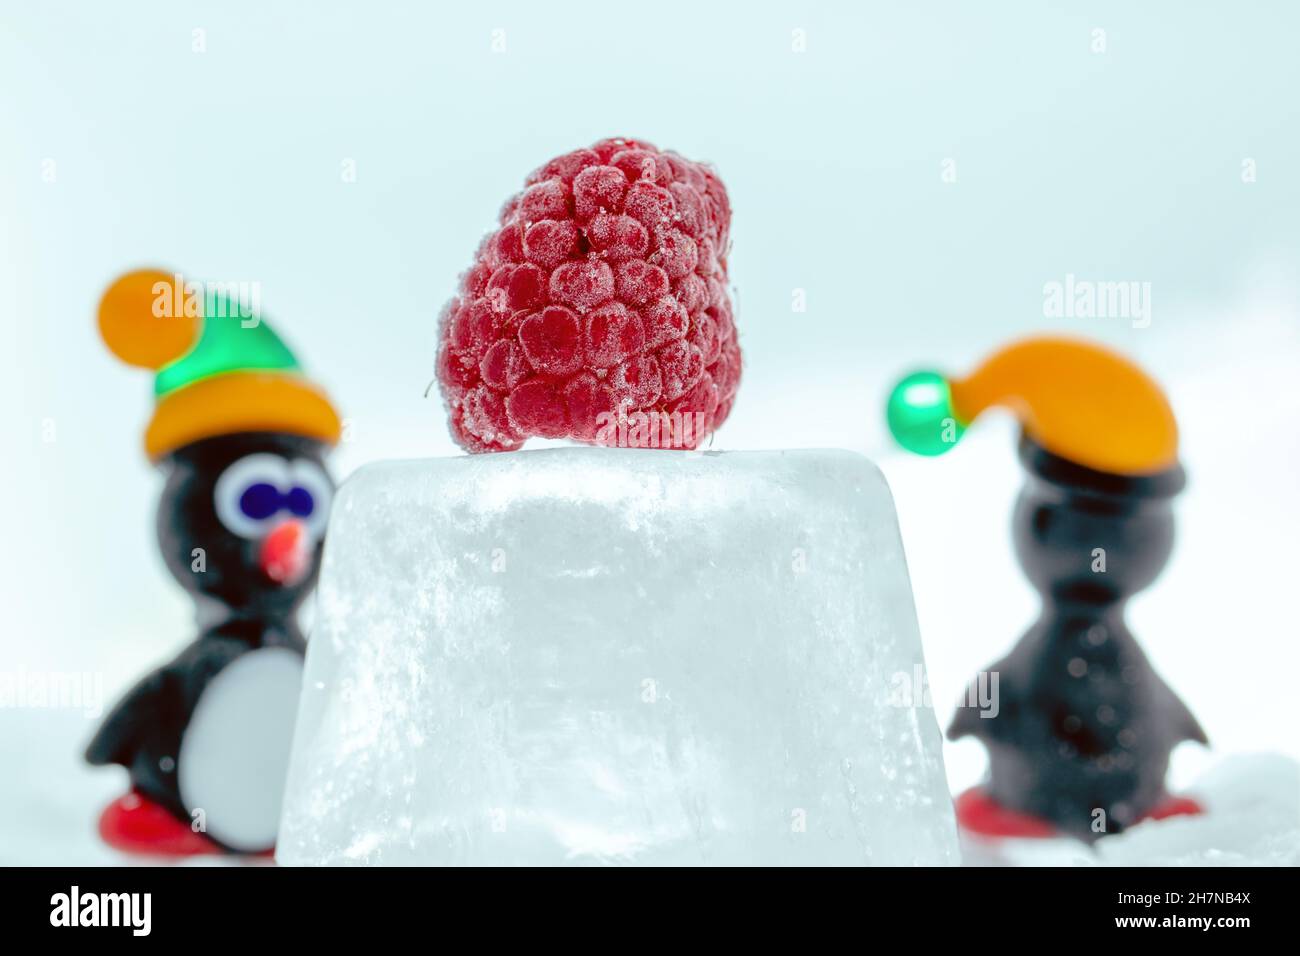 A pair of penguins made from Venetian glass in front of frozen raspberry on the ice cube. Animal figurines made from Murano glass. Handmade fine art. Stock Photo